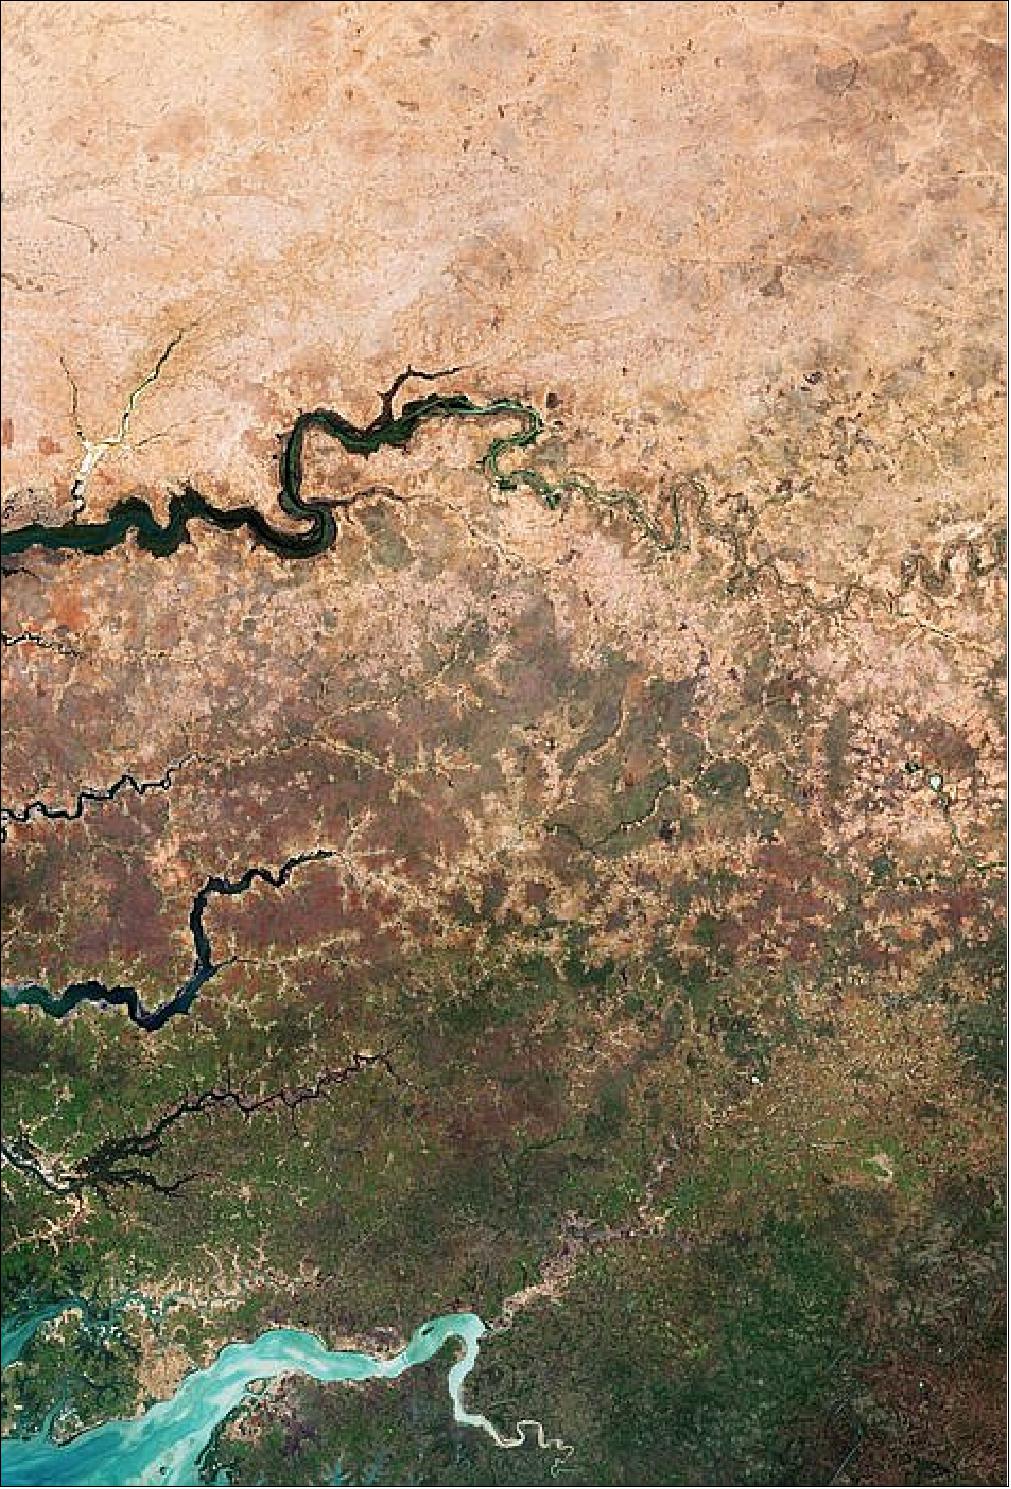 Figure 26: Captured by the Copernicus Sentinel-2 mission in 2019, this image shows the edge of the dry desert in west Africa contrasted with vegetated land. Signs of land degradation can be seen as brighter “islands” around villages and to a lesser extent along roads and rivers showing bare soil and degraded vegetation. The image shows parts of three African countries: Senegal, The Gambia and Guinea-Bissau (image credit: ESA, the image contains modified Copernicus Sentinel data (2019), processed by ESA, CC BY-SA 3.0 IGO)